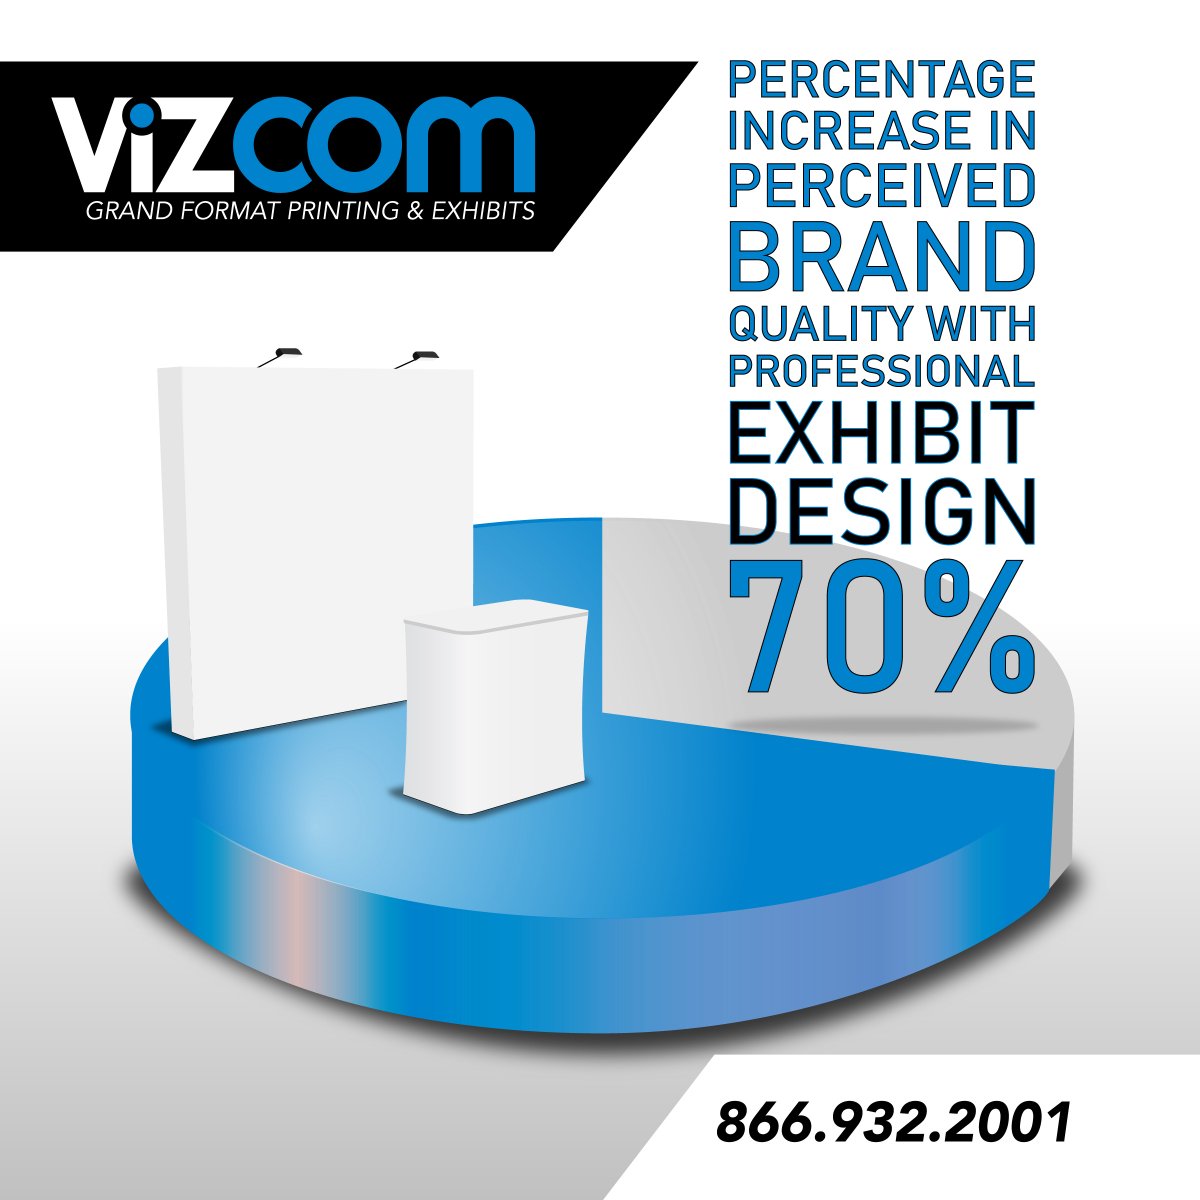 ↗️ Elevate your brand perception with Vizcom's professional exhibit design. Make an unforgettable impression on your audience with a booth that reflects your excellence.

#brandperception #exhibitdesign #brandperception #exhibitdesign #tradeshowexhibits #elevateyourbrand #exhibit